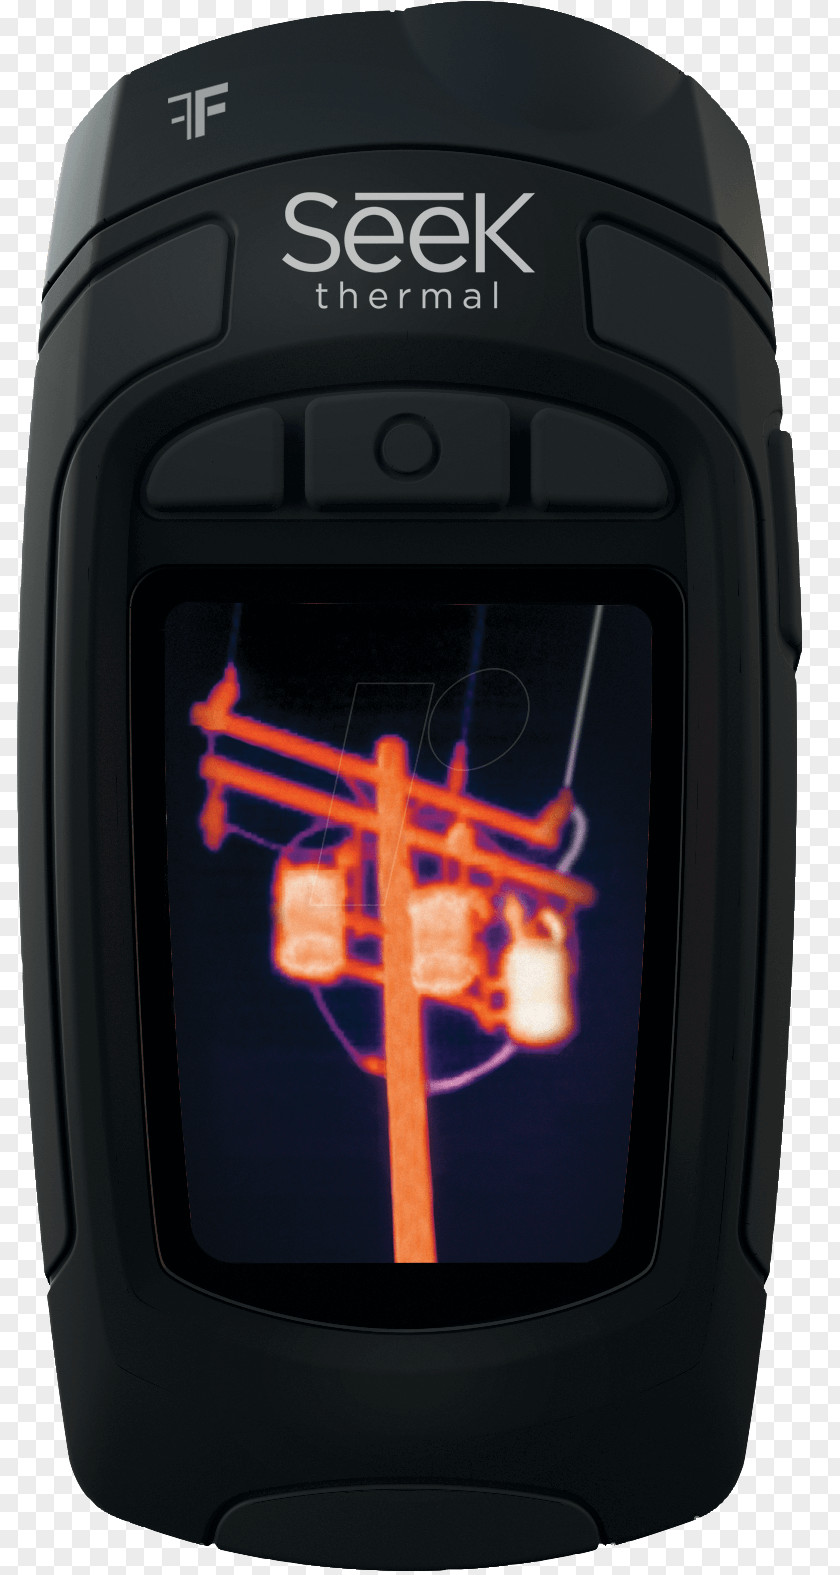 Camera Thermographic Thermography Forward-looking Infrared Thermal Imaging PNG